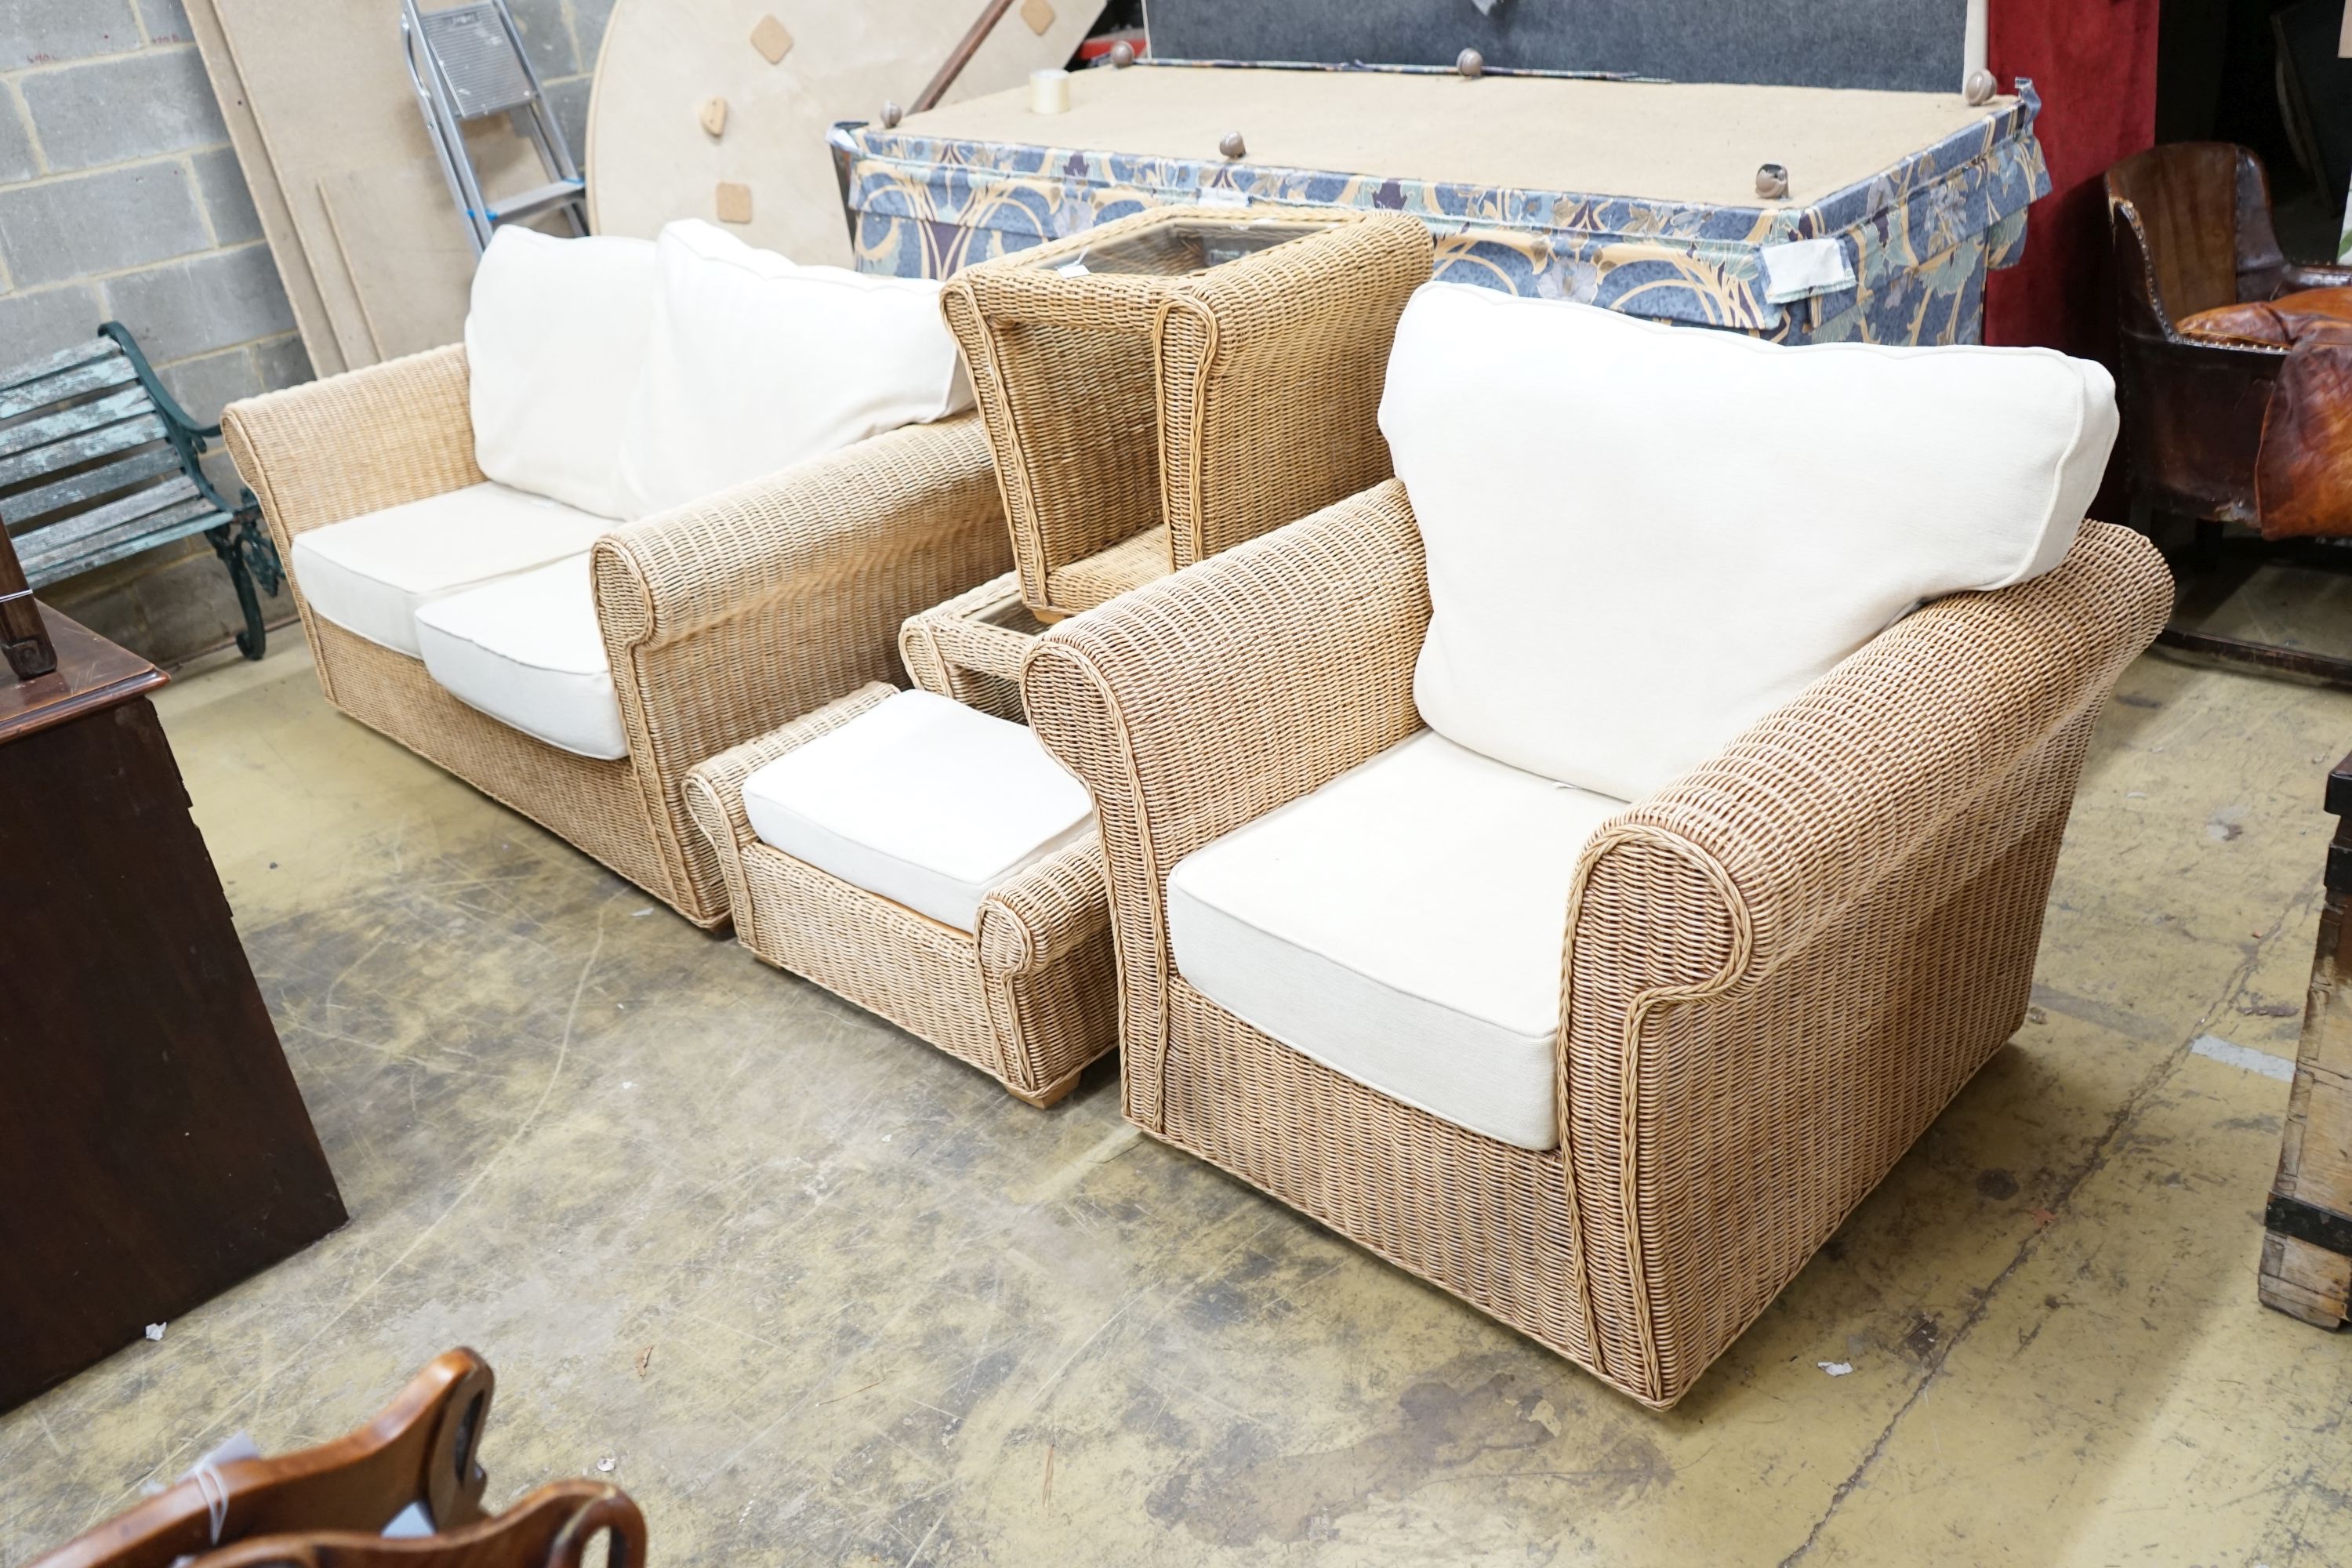 A rattan conservatory suite comprising two seater settee, length 180cm, depth 85cm, height 184cm, armchair, footstool and two glass topped tables                                                                           